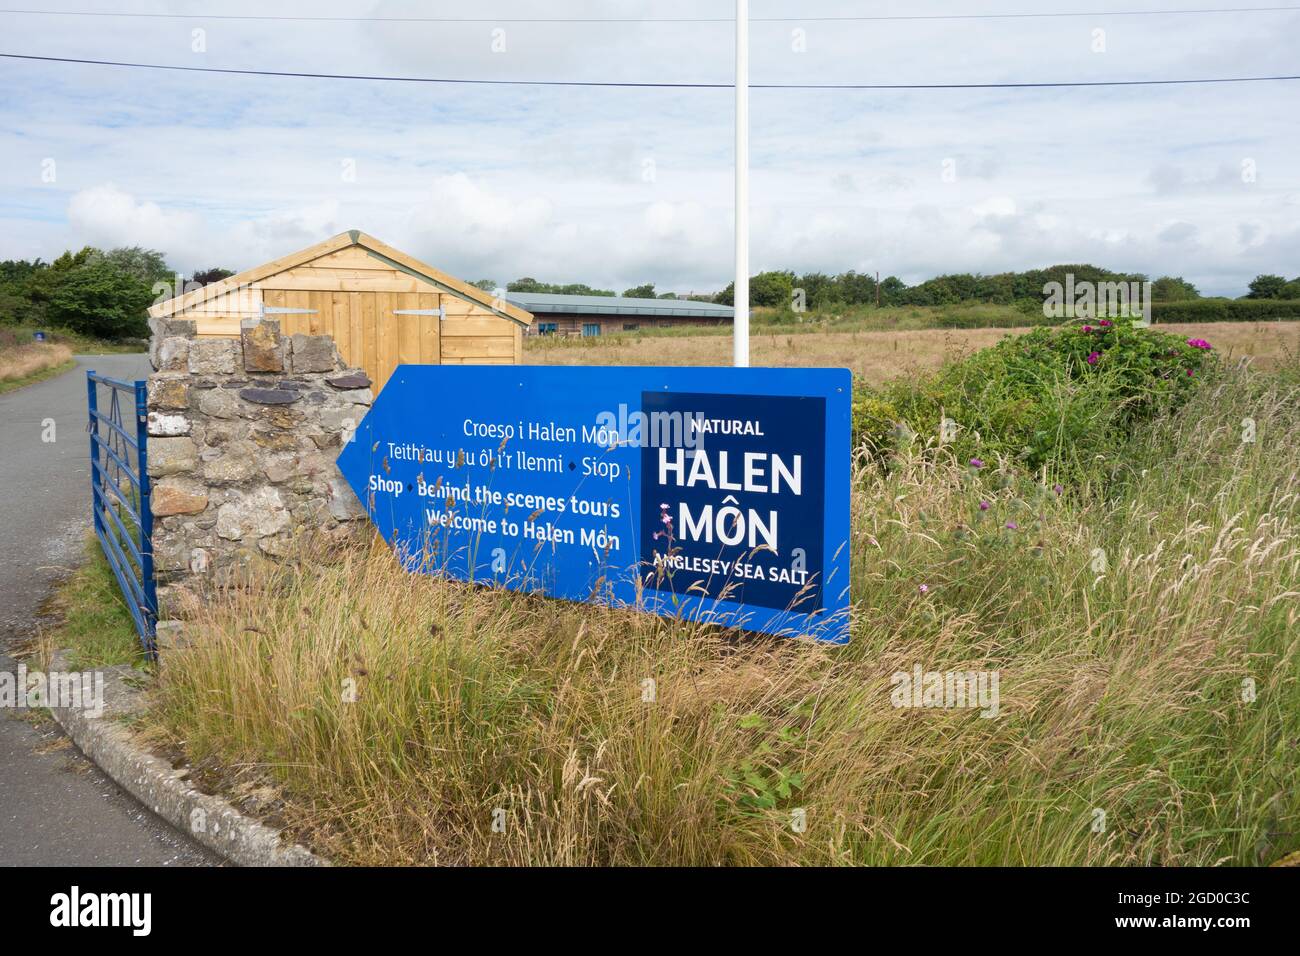 Entrance to Halen Mon in Wales where they produce Anglesey Sea Salt Stock Photo